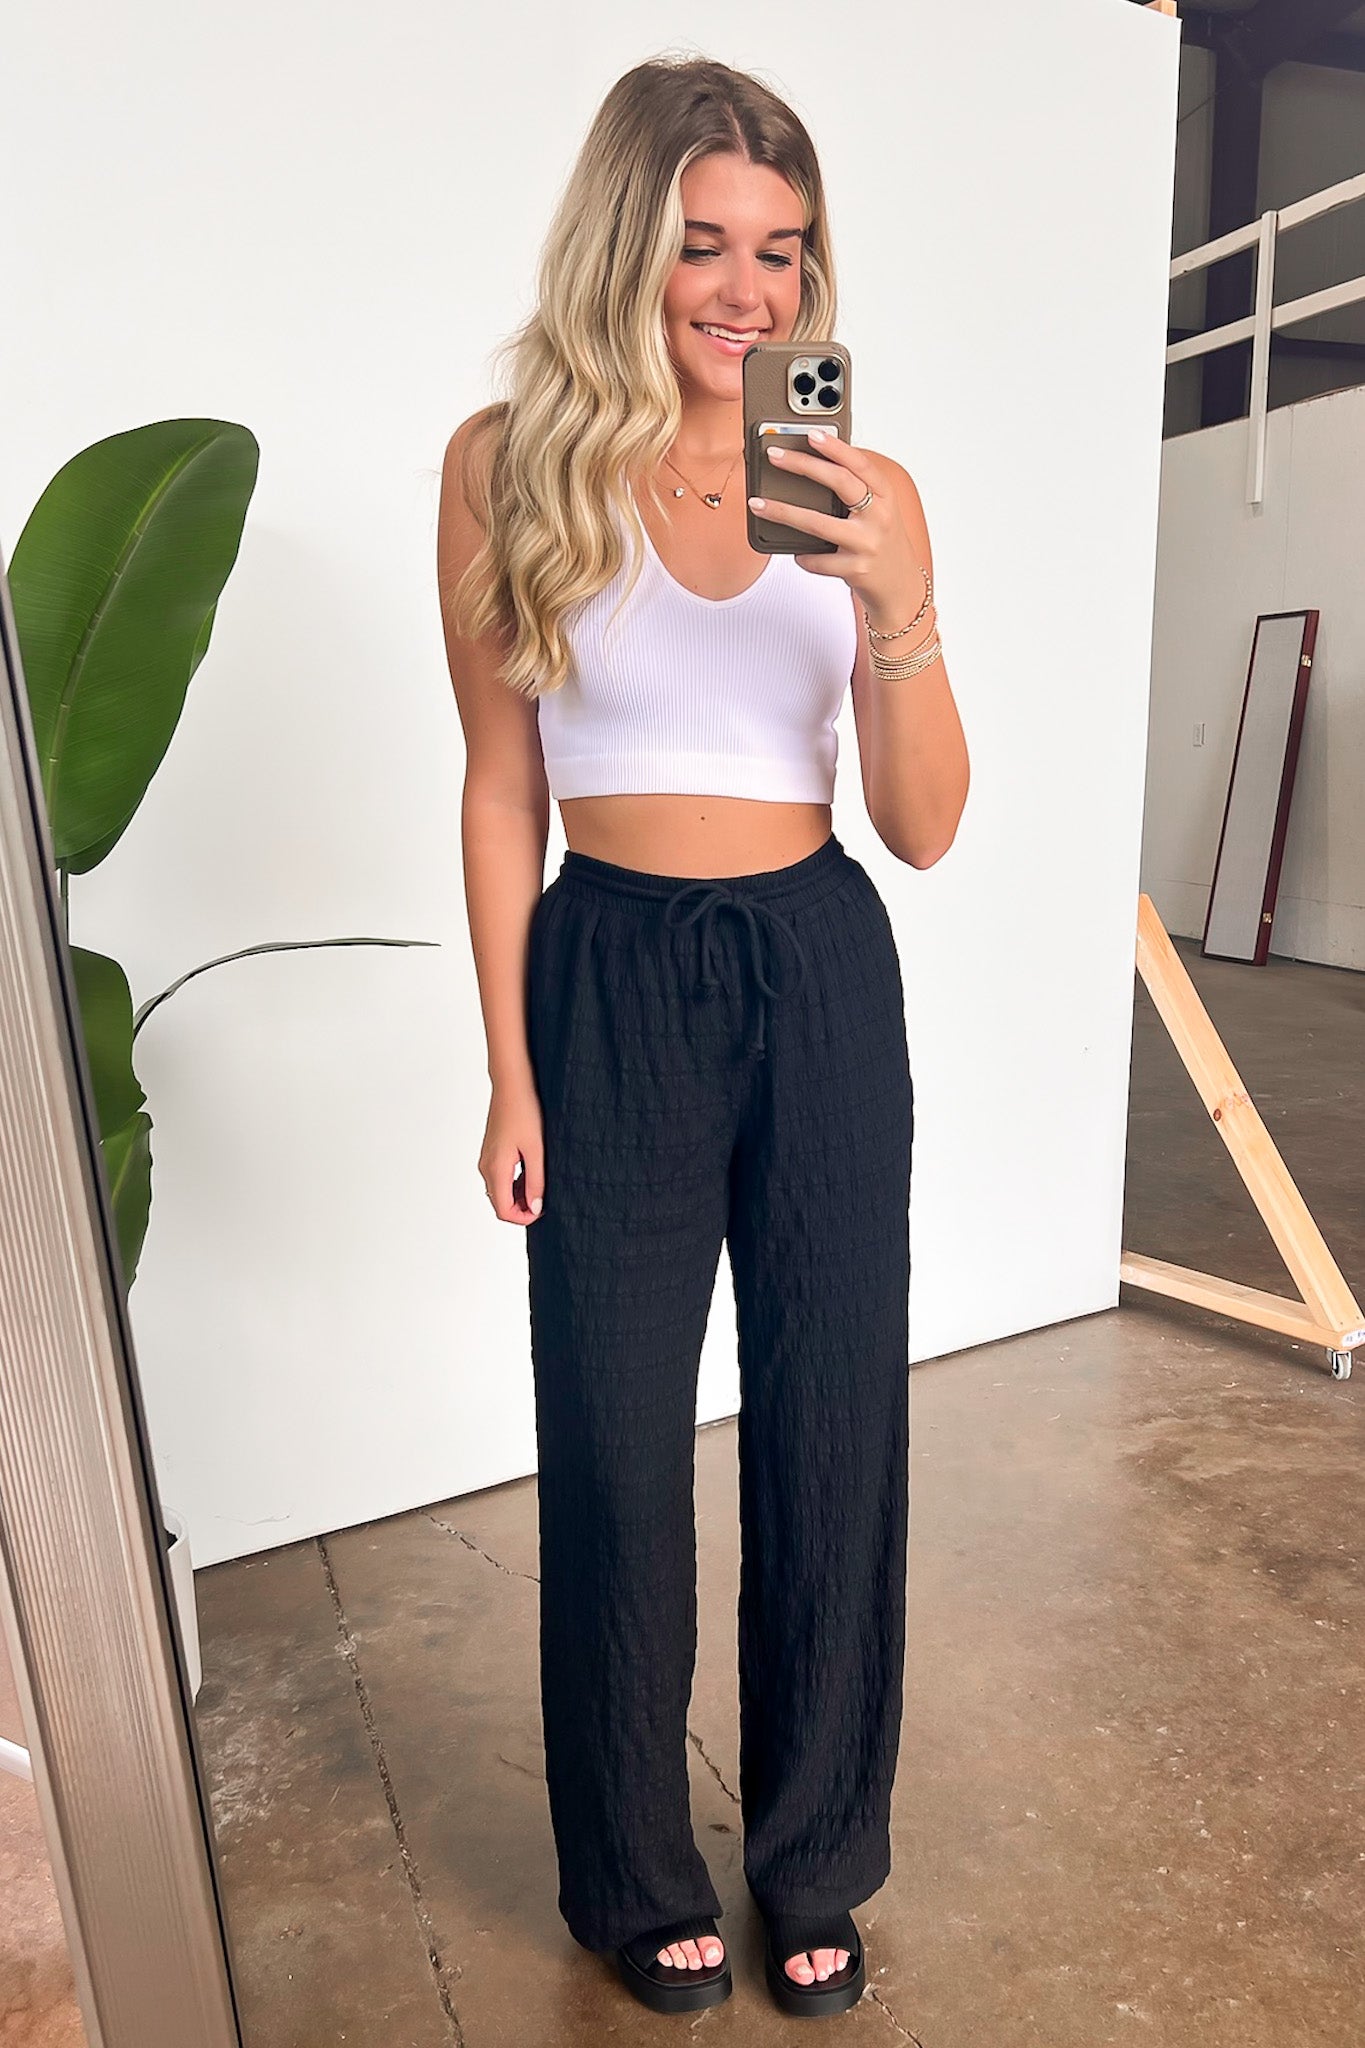  Delightful Approach High Waist Textured Knit Pants - Madison and Mallory